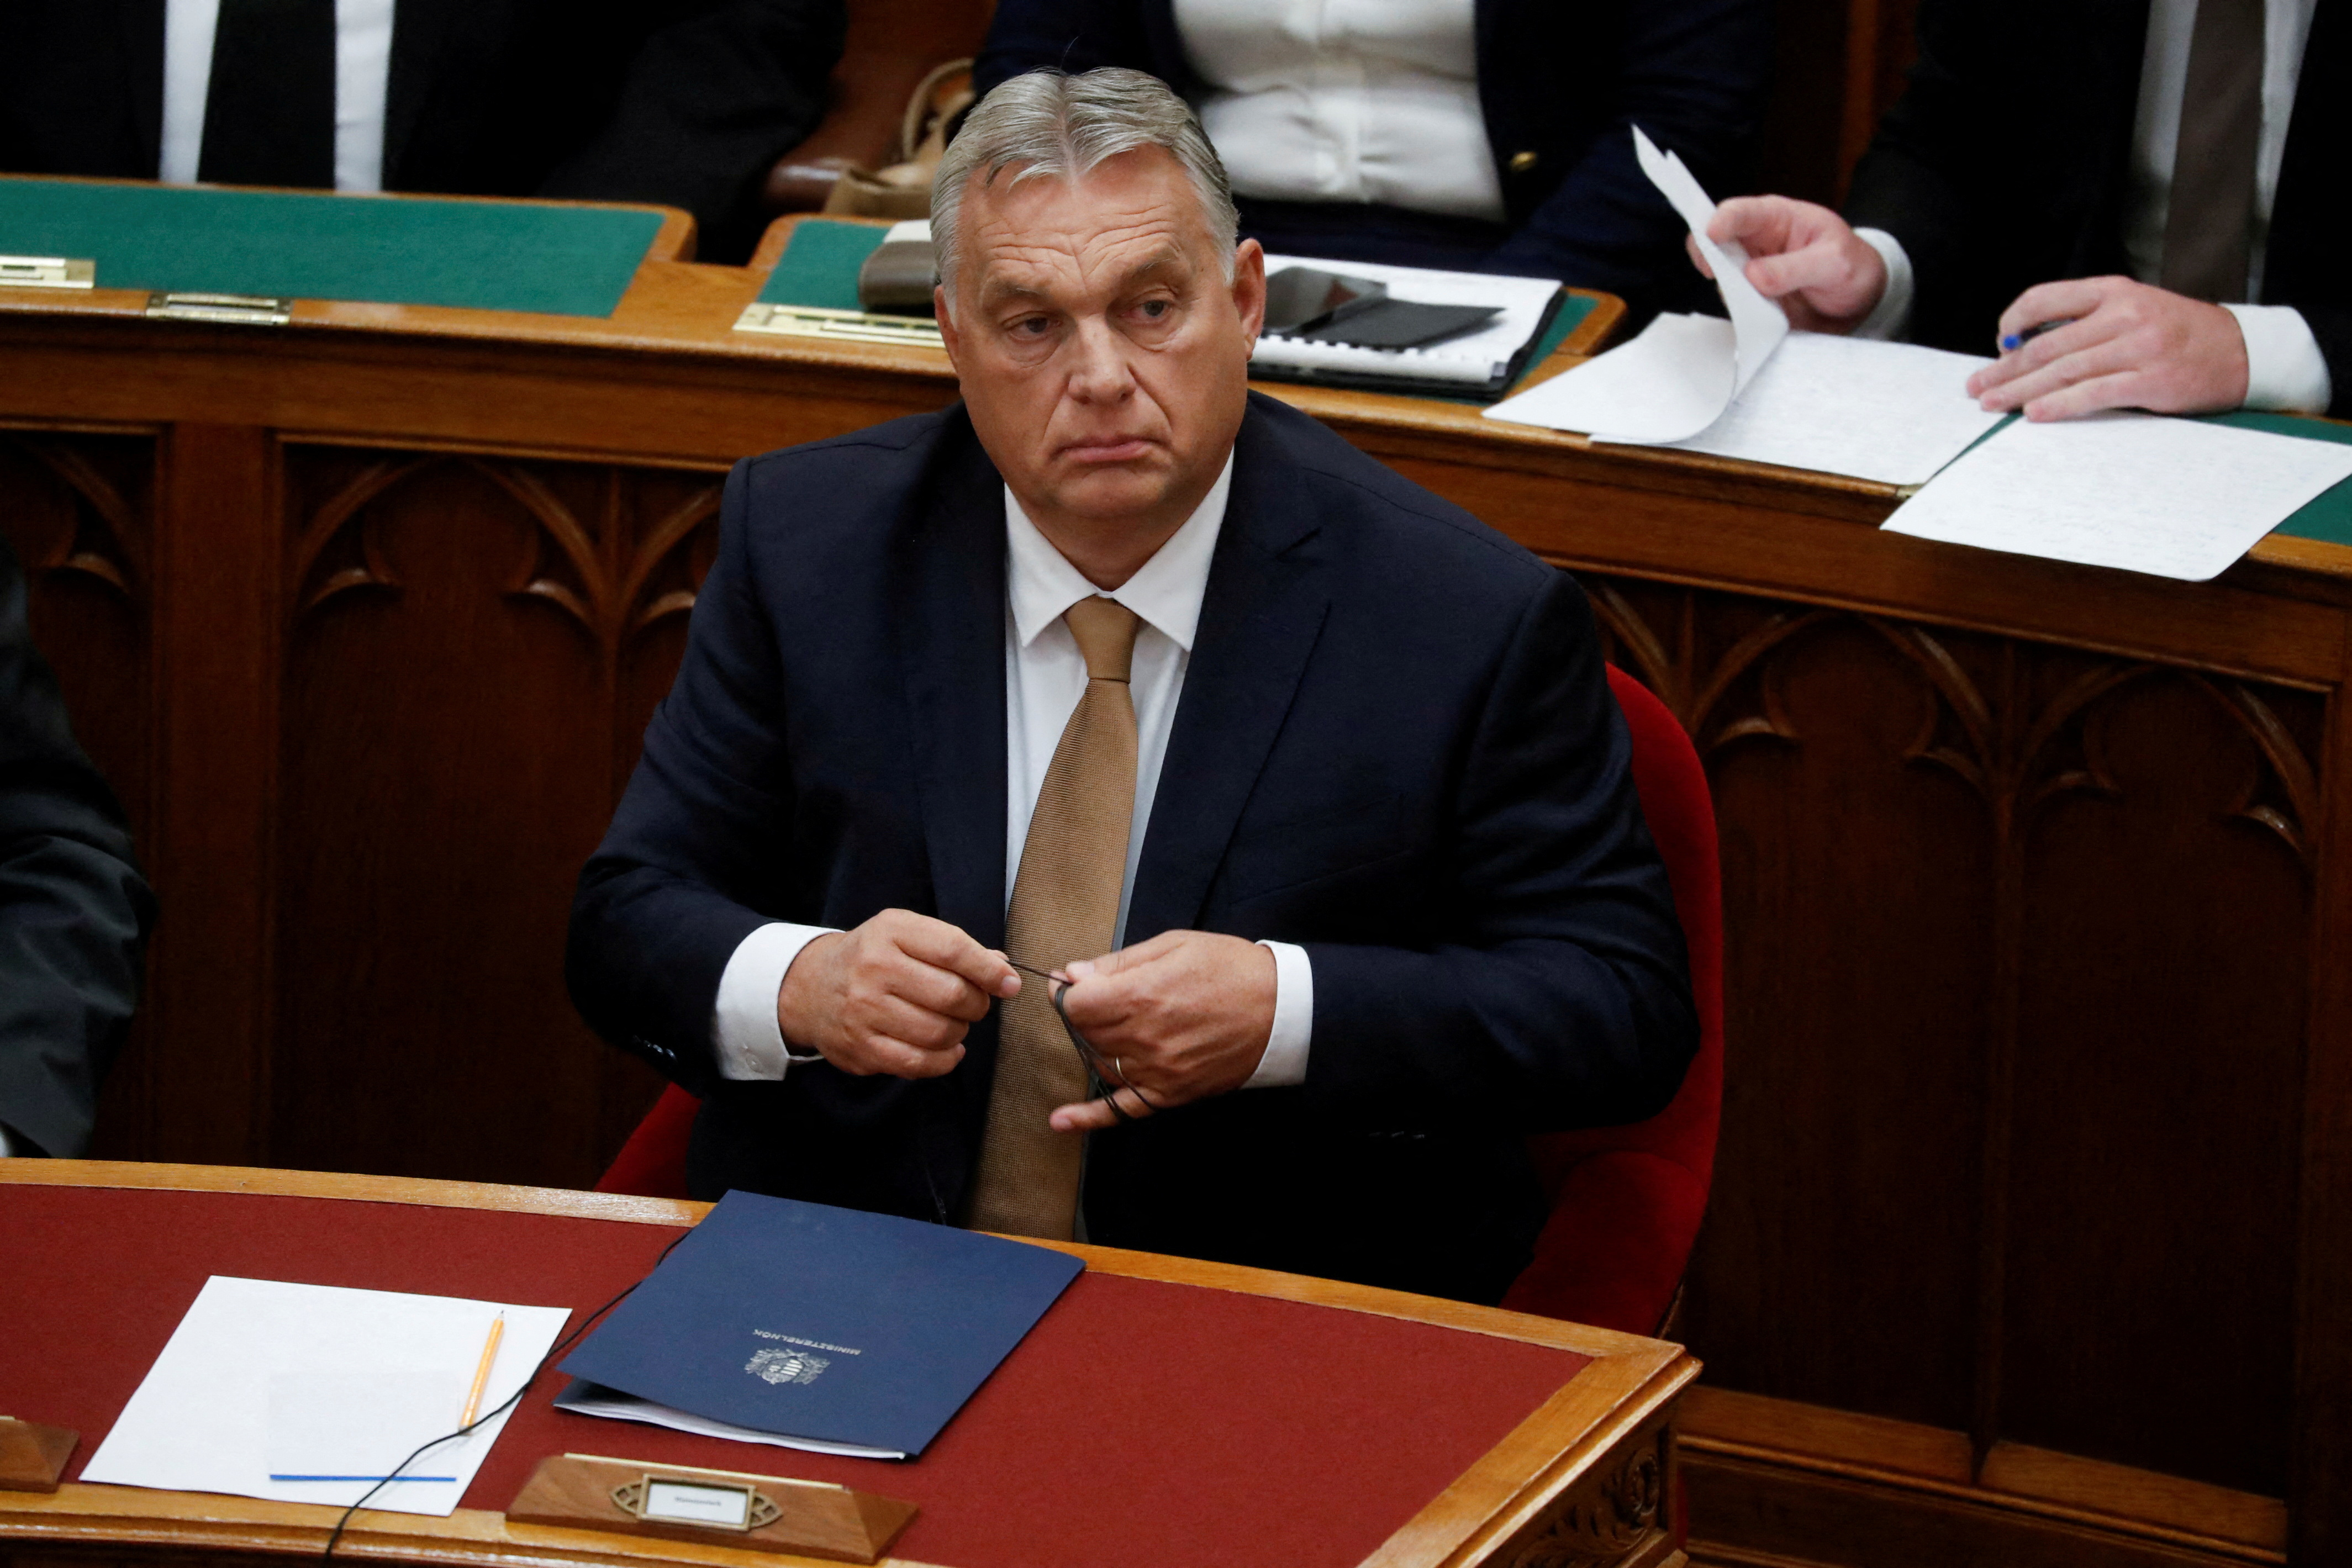 Hungary's parliament convenes for autumn session, in Budapest